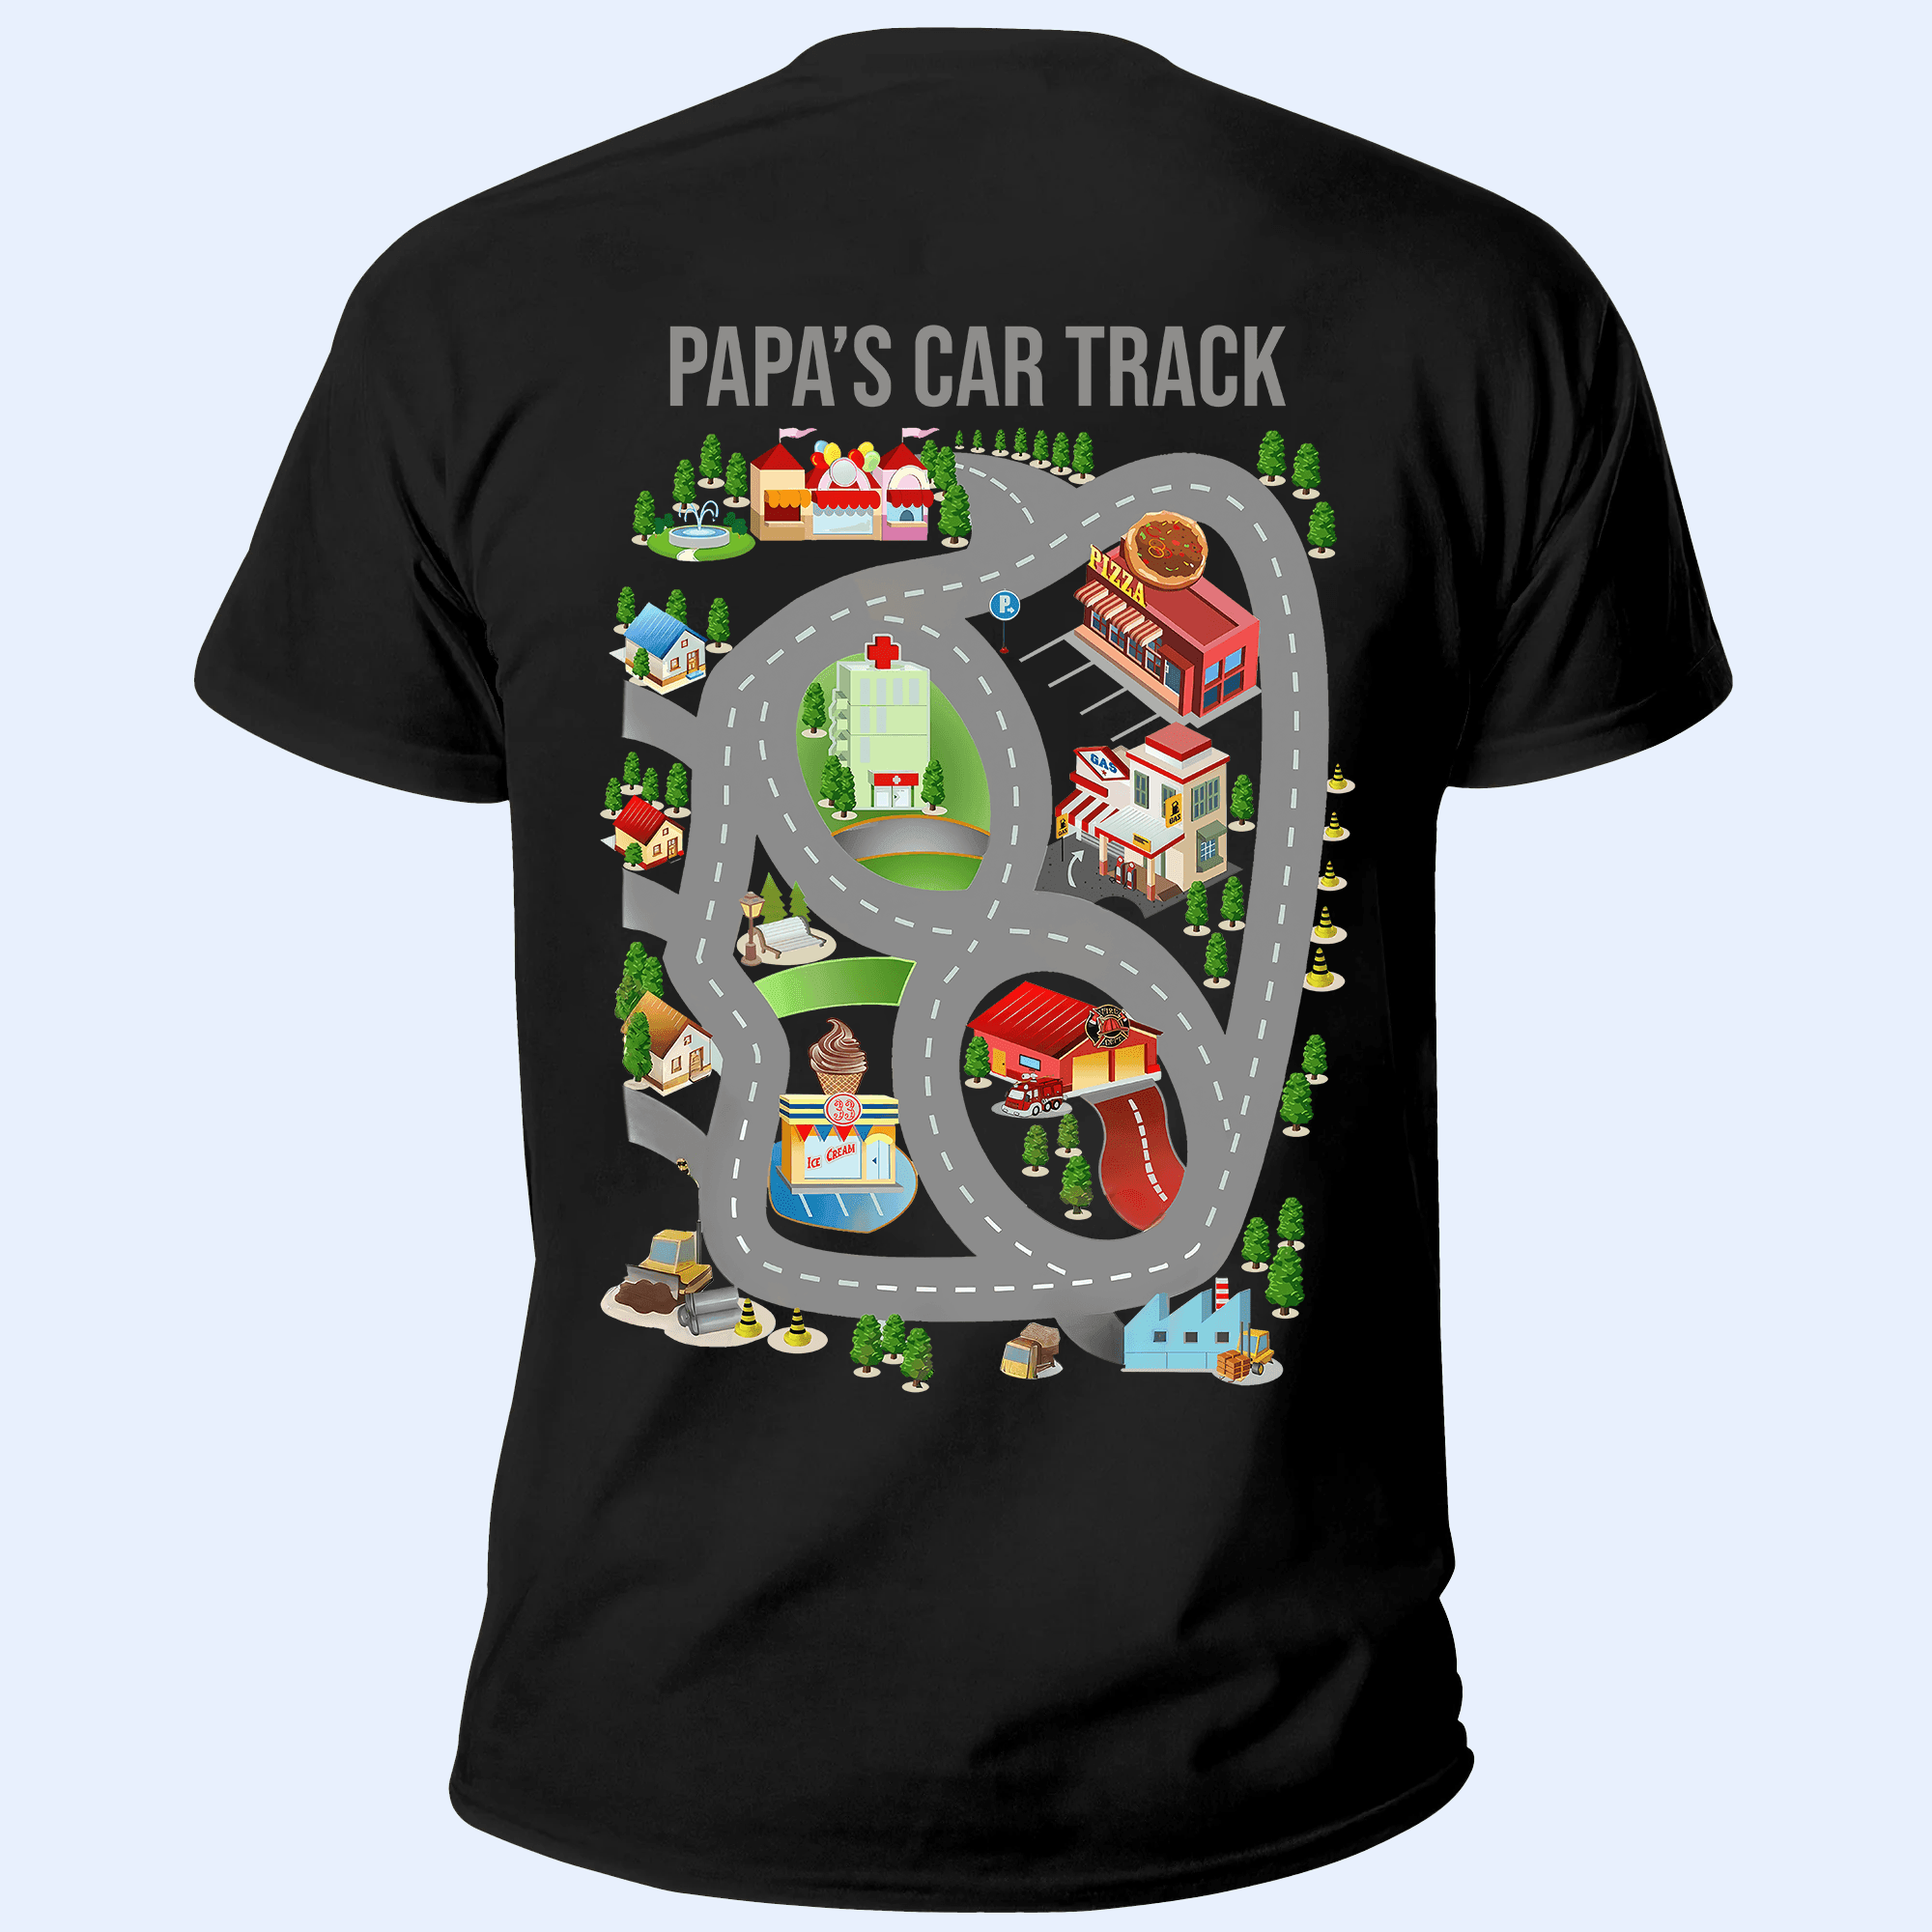 Play Cars On Dad's Back - Personalized Custom Back Printed T Shirt - Father's Day Gift for Dad, Grandpa, Daddy, Dada, Dad Jokes - Suzitee Store